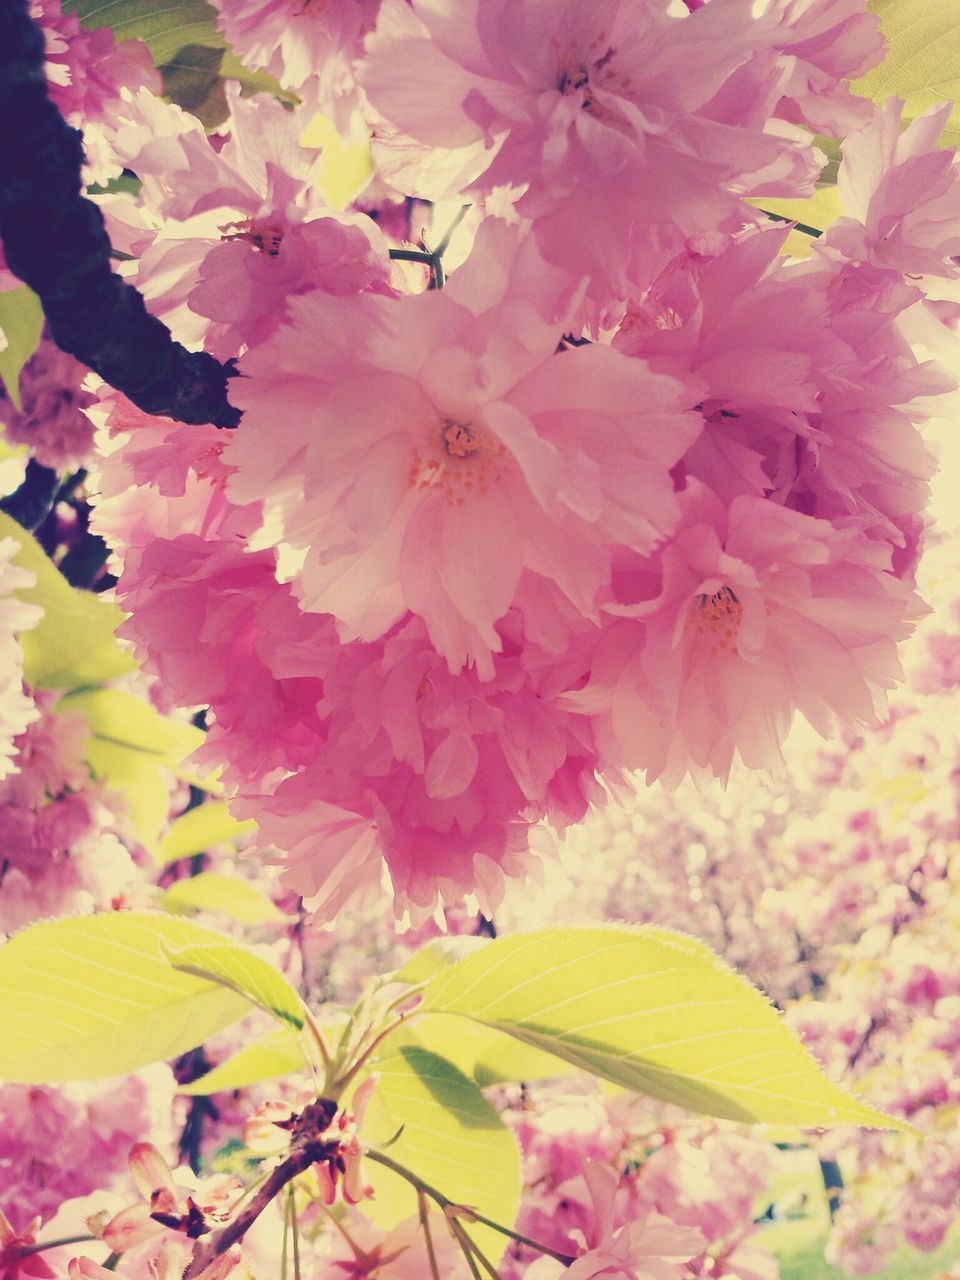 flower, freshness, pink color, fragility, growth, beauty in nature, petal, nature, branch, blossom, close-up, flower head, blooming, in bloom, low angle view, pink, springtime, outdoors, tree, botany